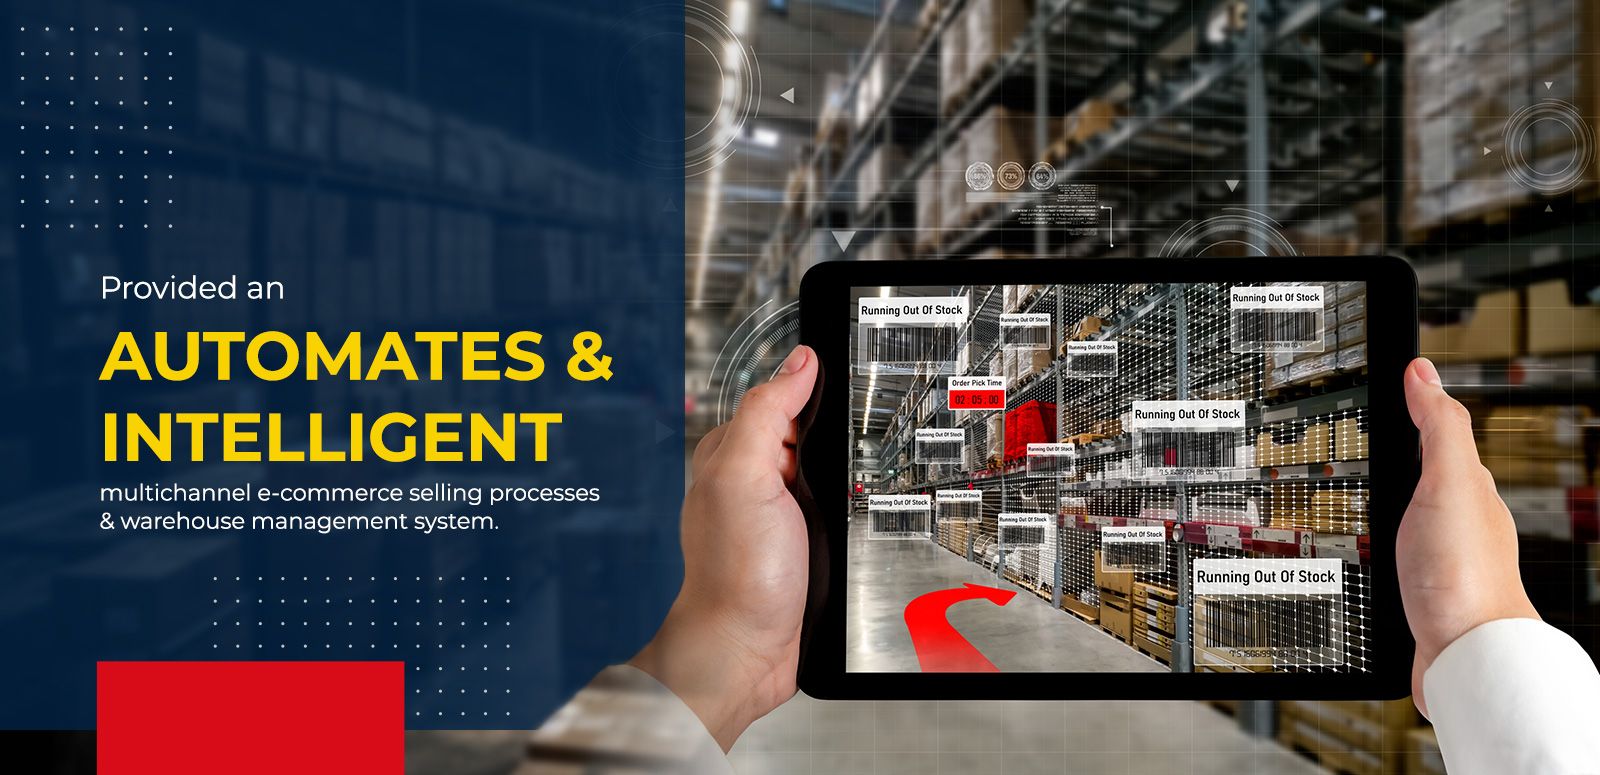 WHAT IS A Quick WMS? (WAREHOUSE MANAGEMENT SYSTEM)